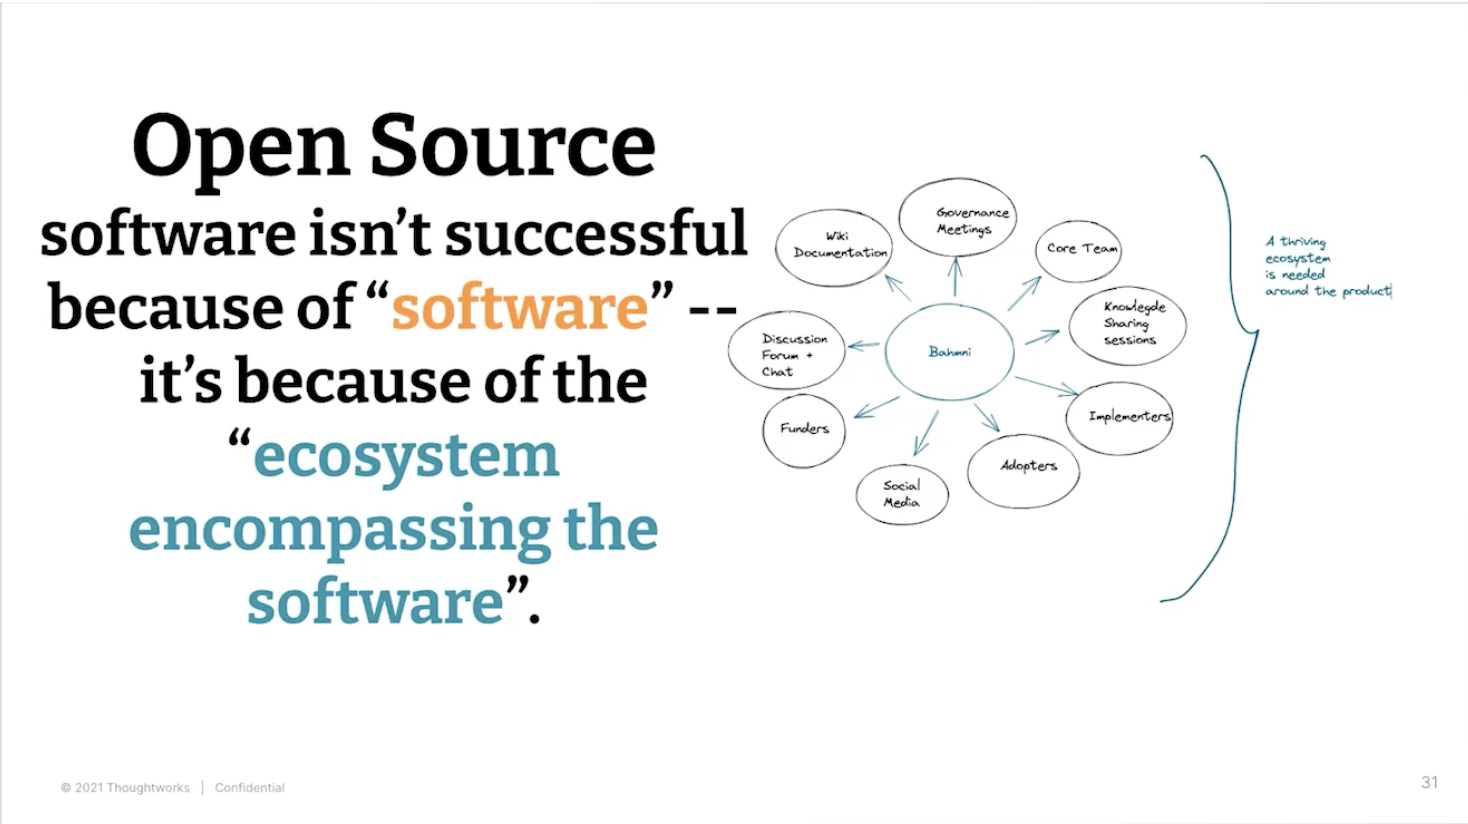 Open source, software isn't successful because of "software"- it's because of the "ecosystem encompassing the software"